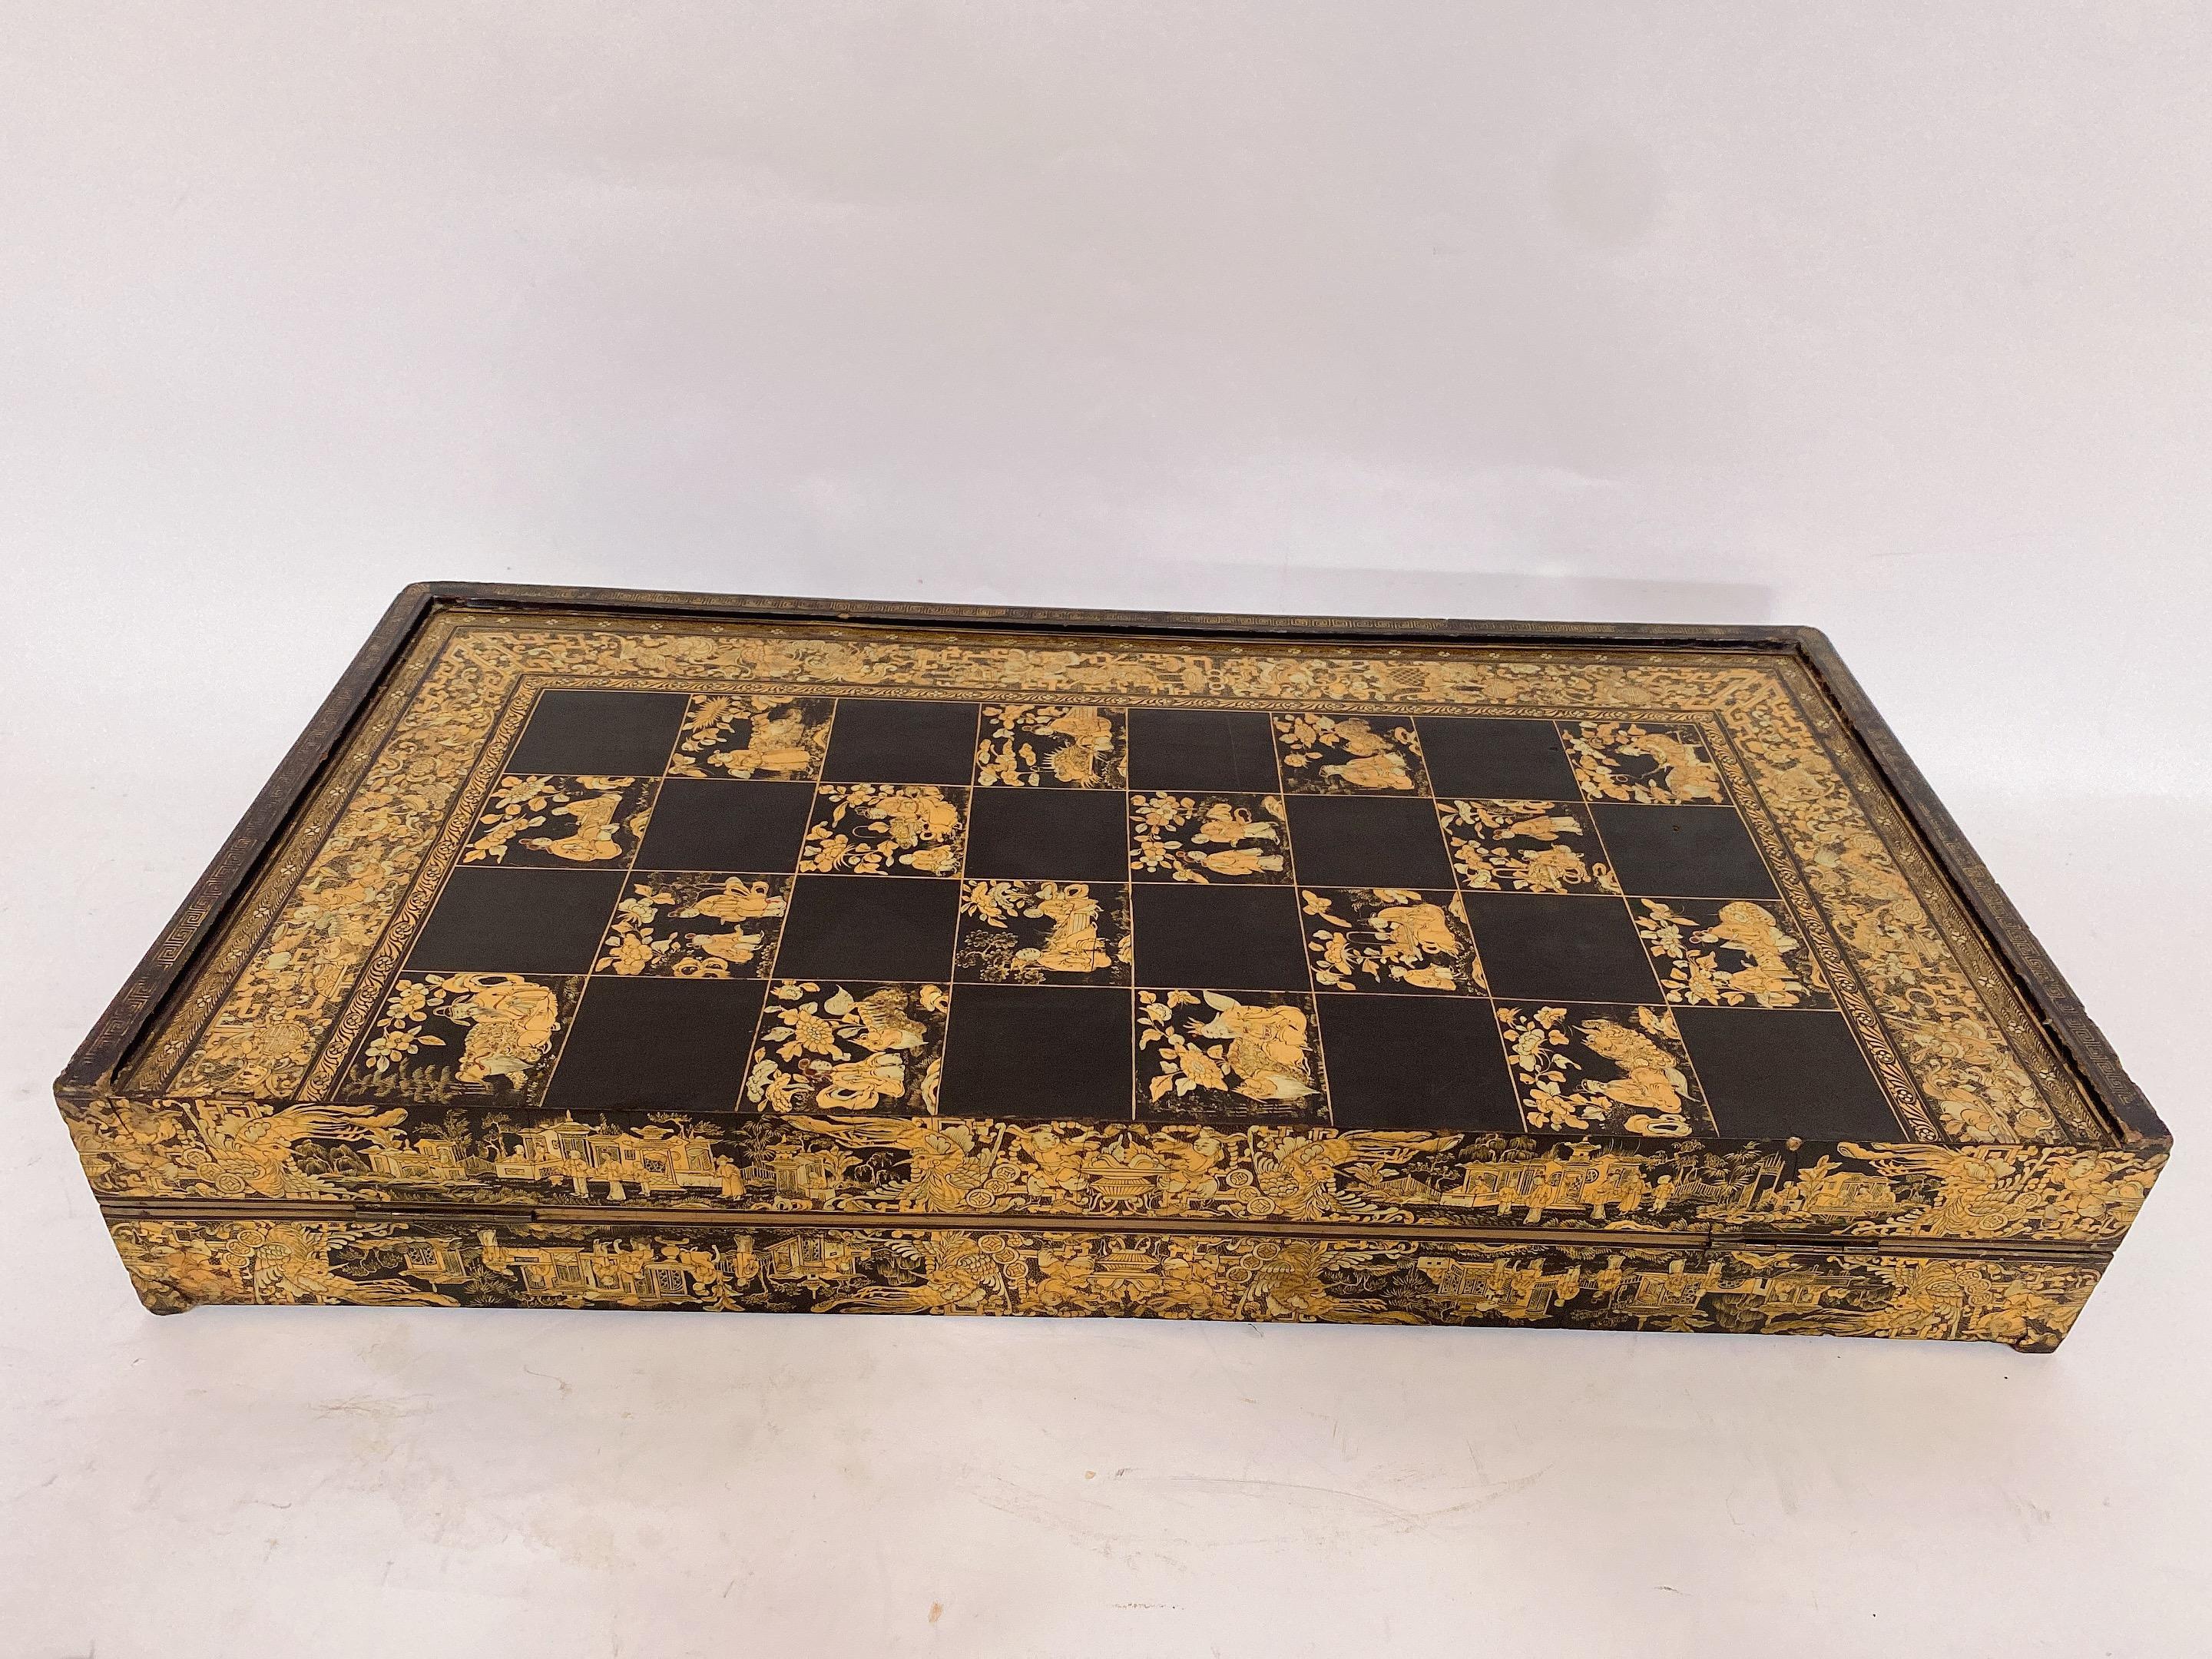 19th Century rare large 25'' Chinese export gilt decorated black lacquer gaming board box, finely decorated with gold on a black background of characters, fantastic animals, bats and floral arrangements. it is very large unique piece, The outer part